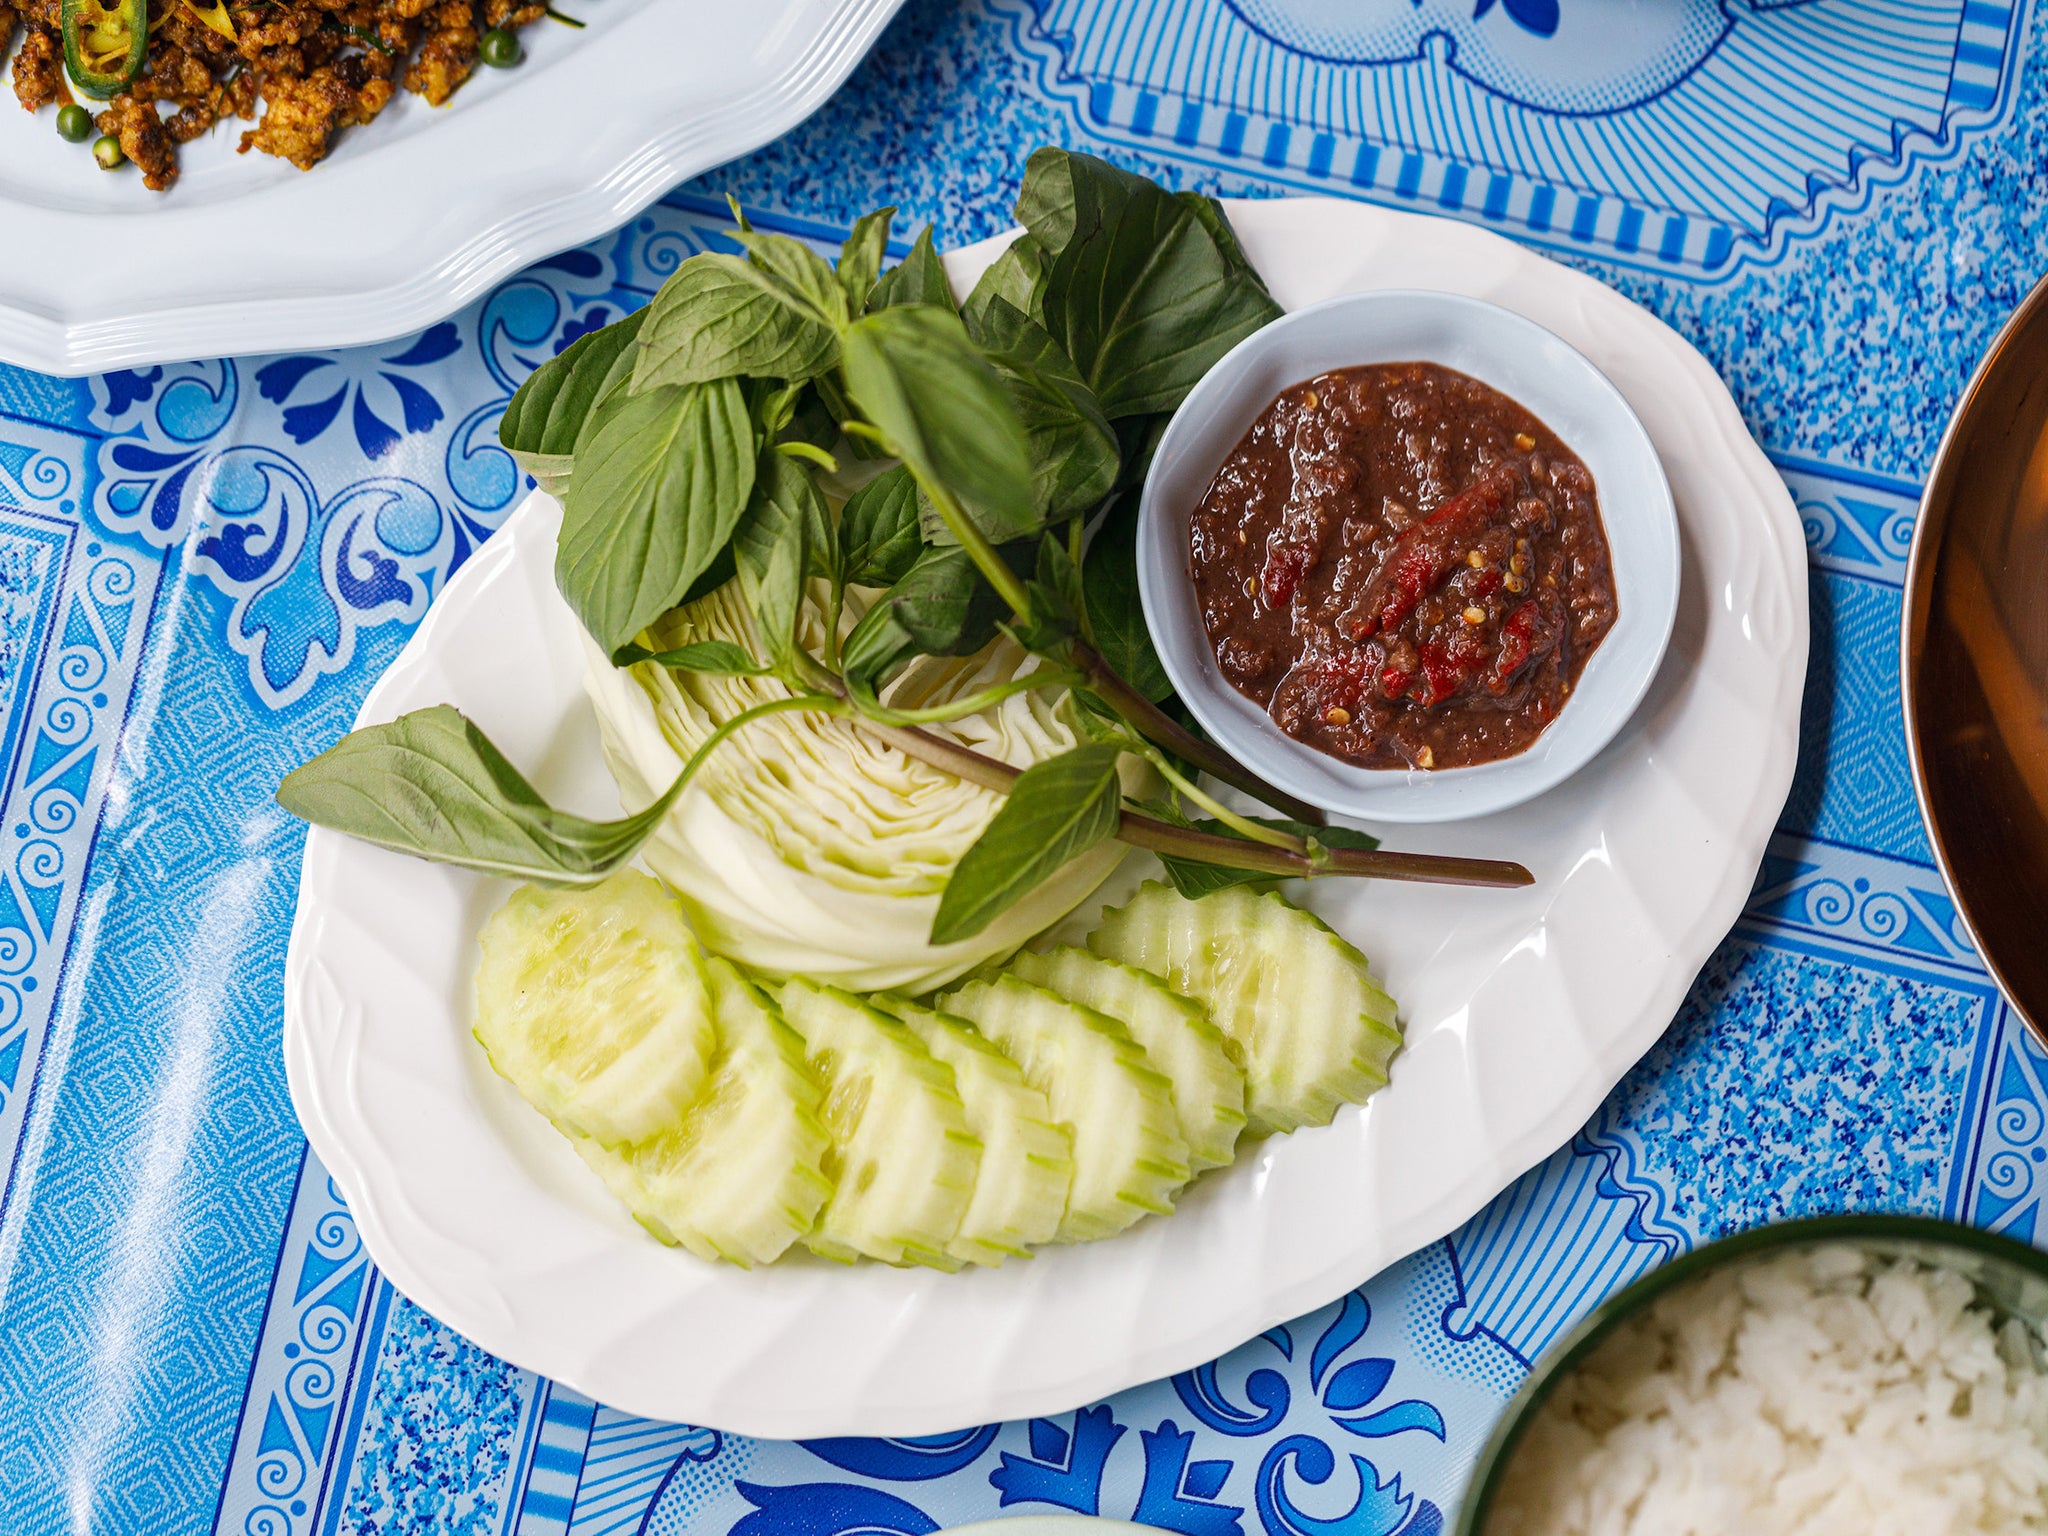 Shrimp paste relish is always on the table in Thai restaurants